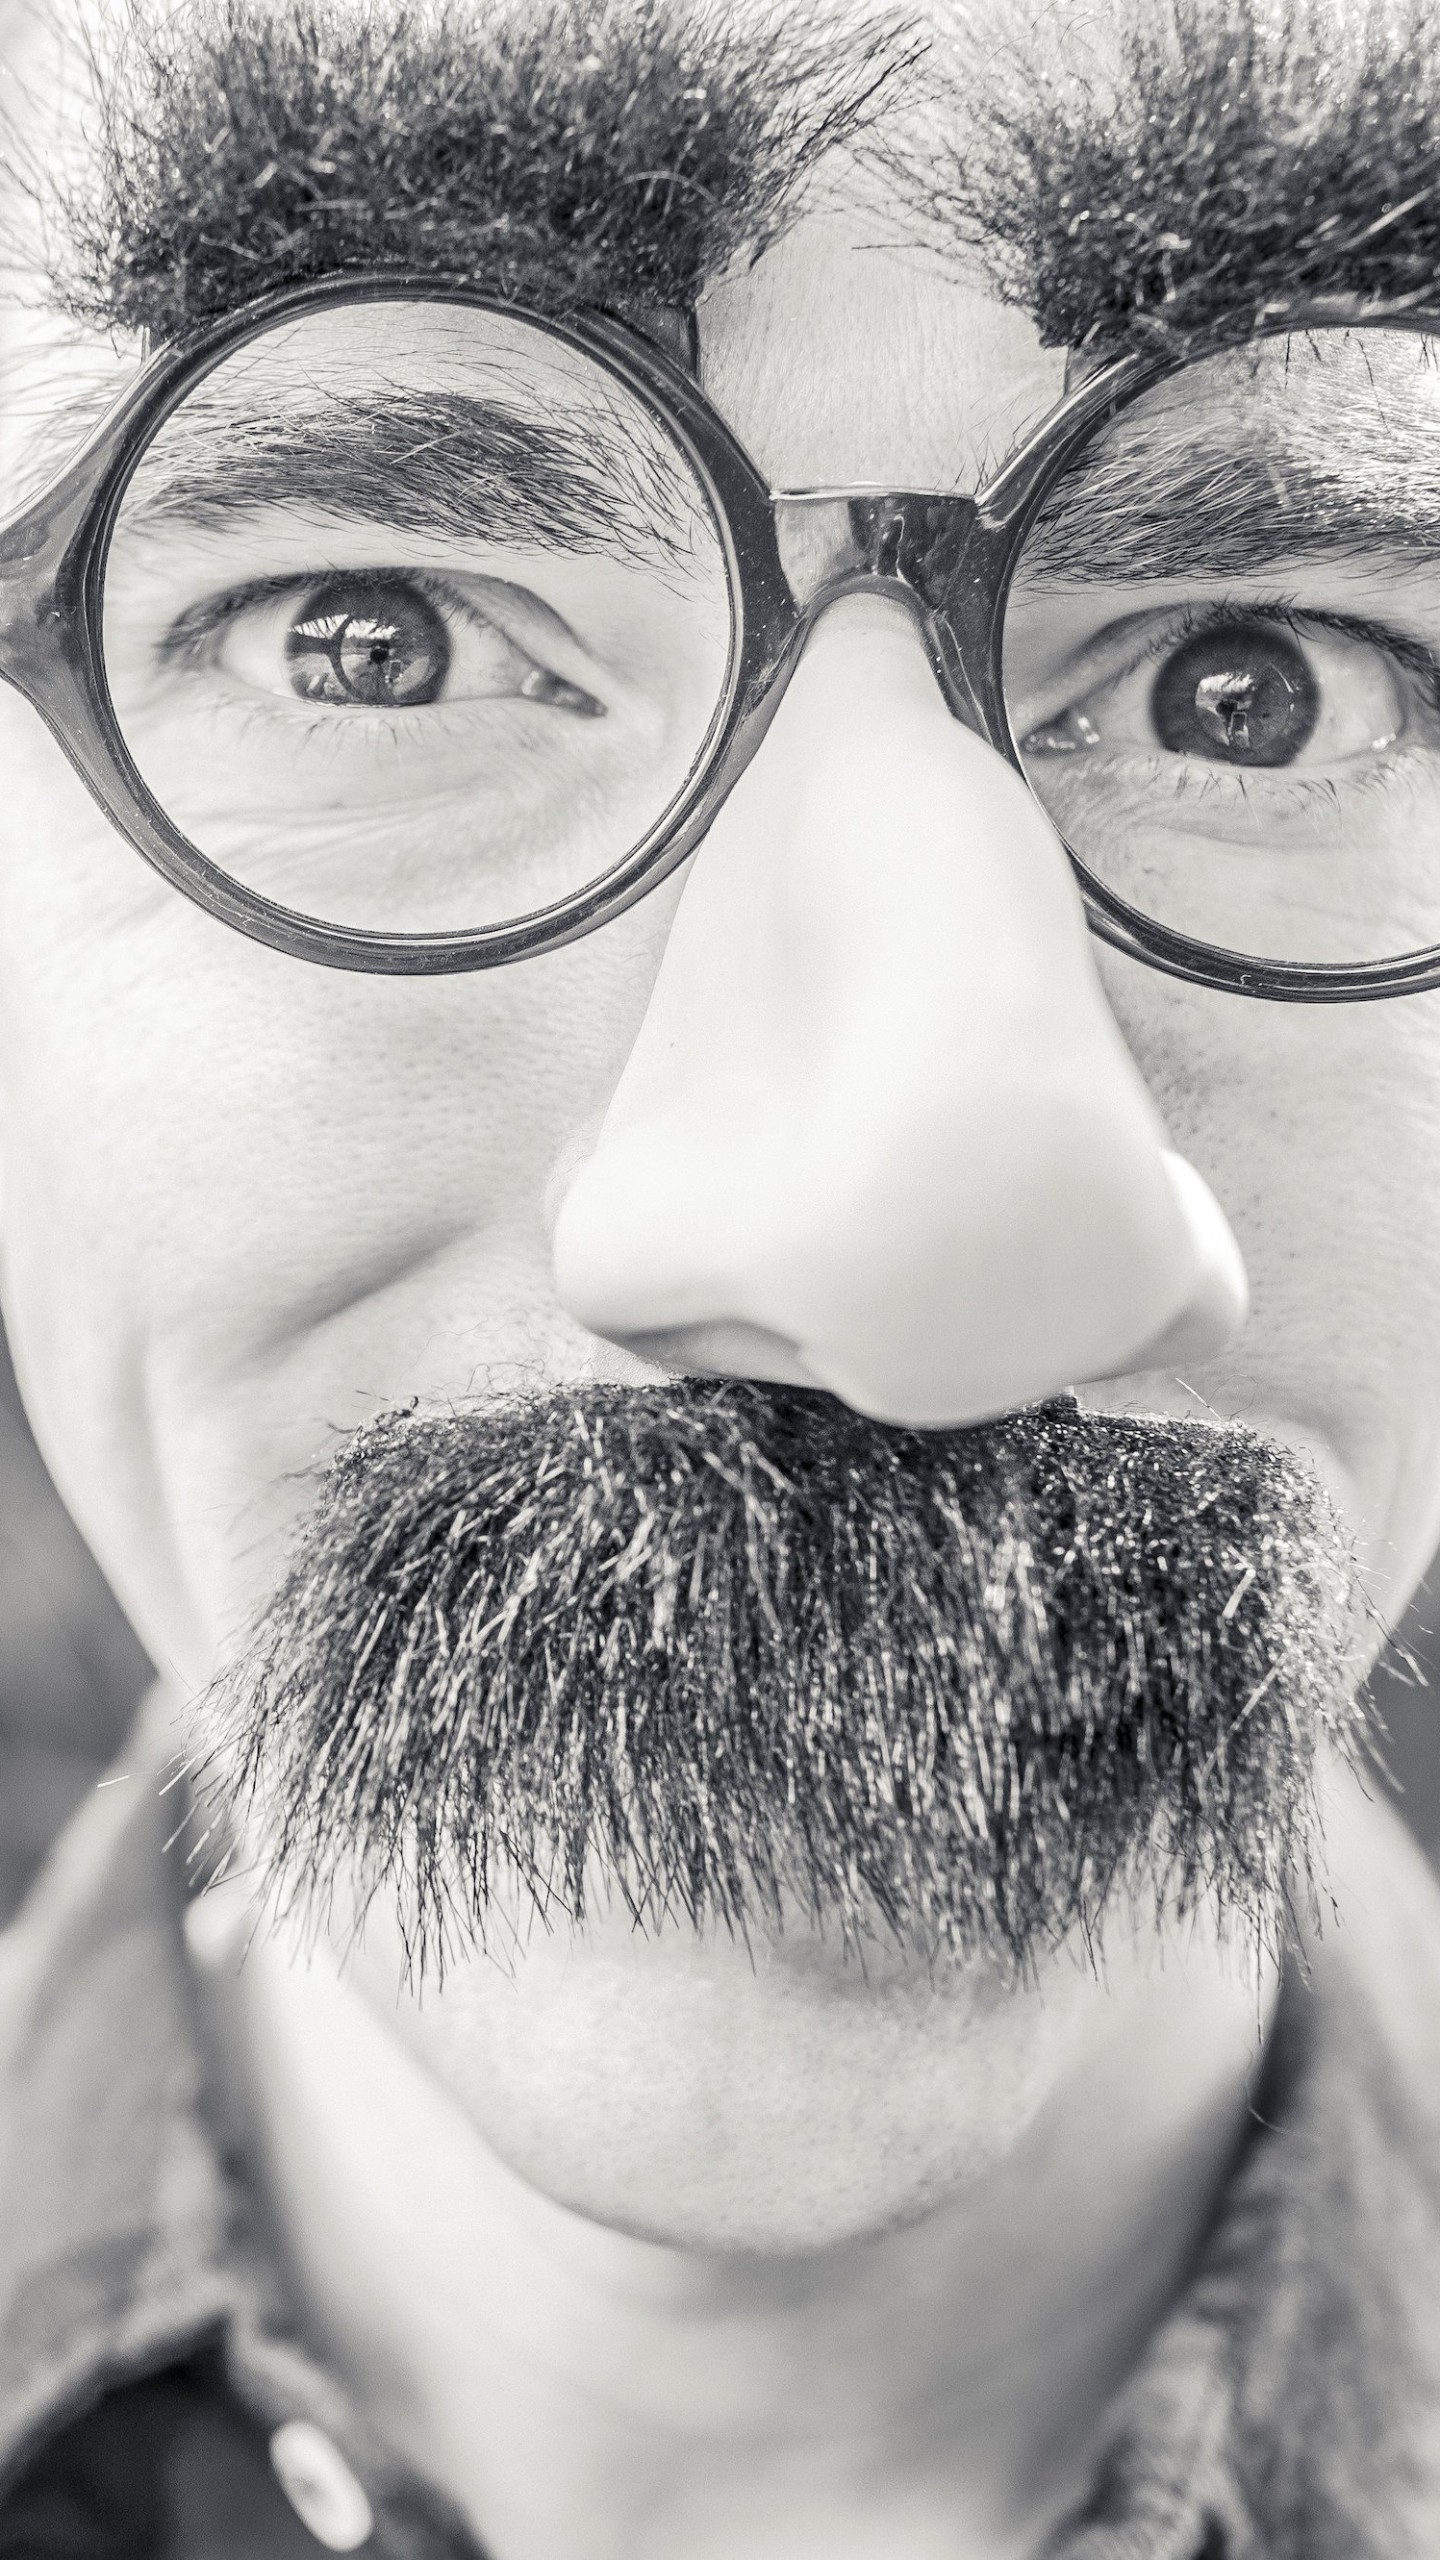 Groucho Glasses Man Wallpaper for SAMSUNG Galaxy S6